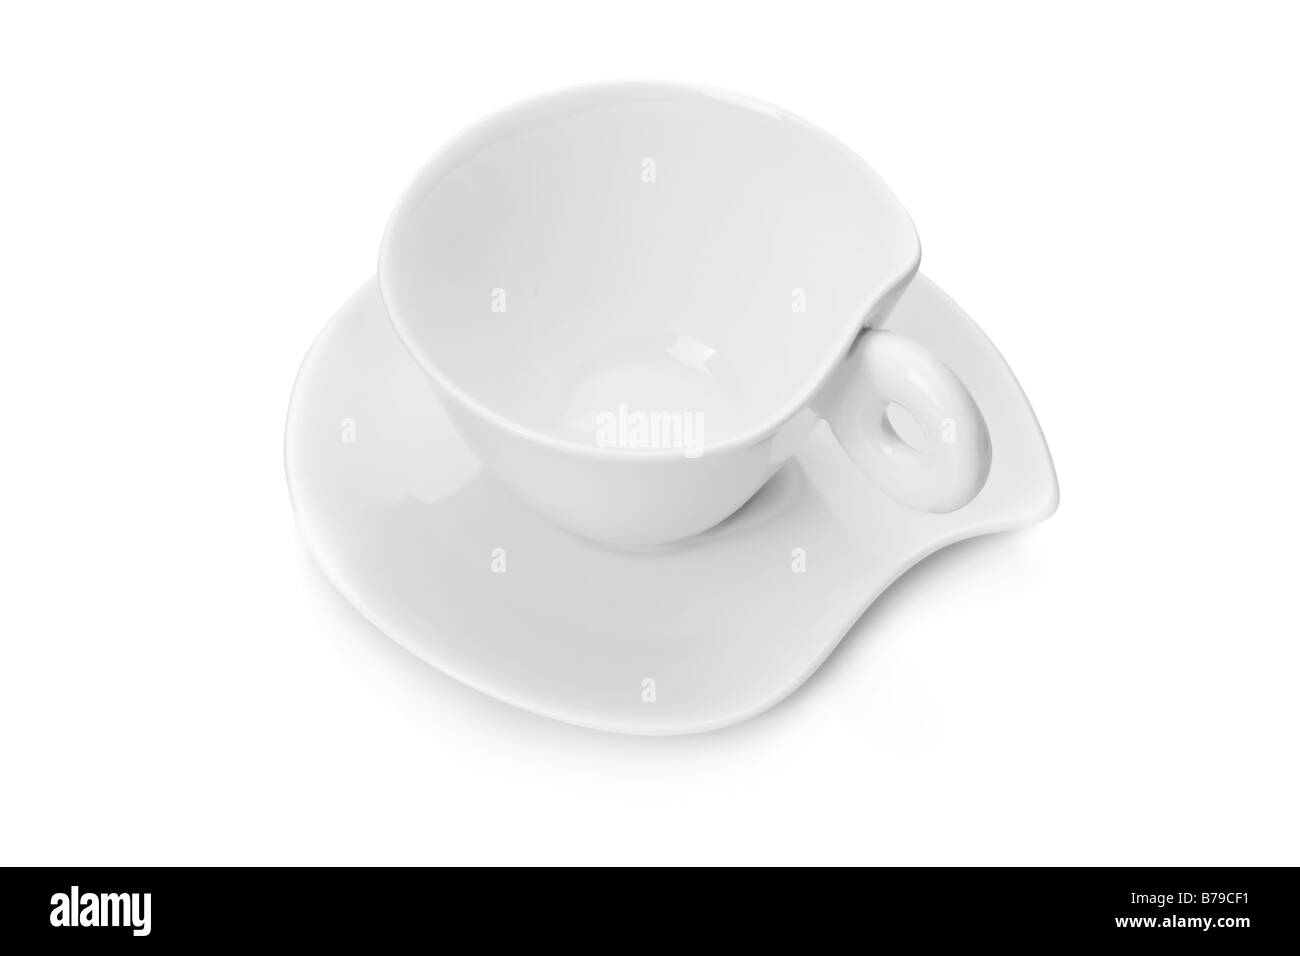 White tea cup and saucer isolated on white background Stock Photo